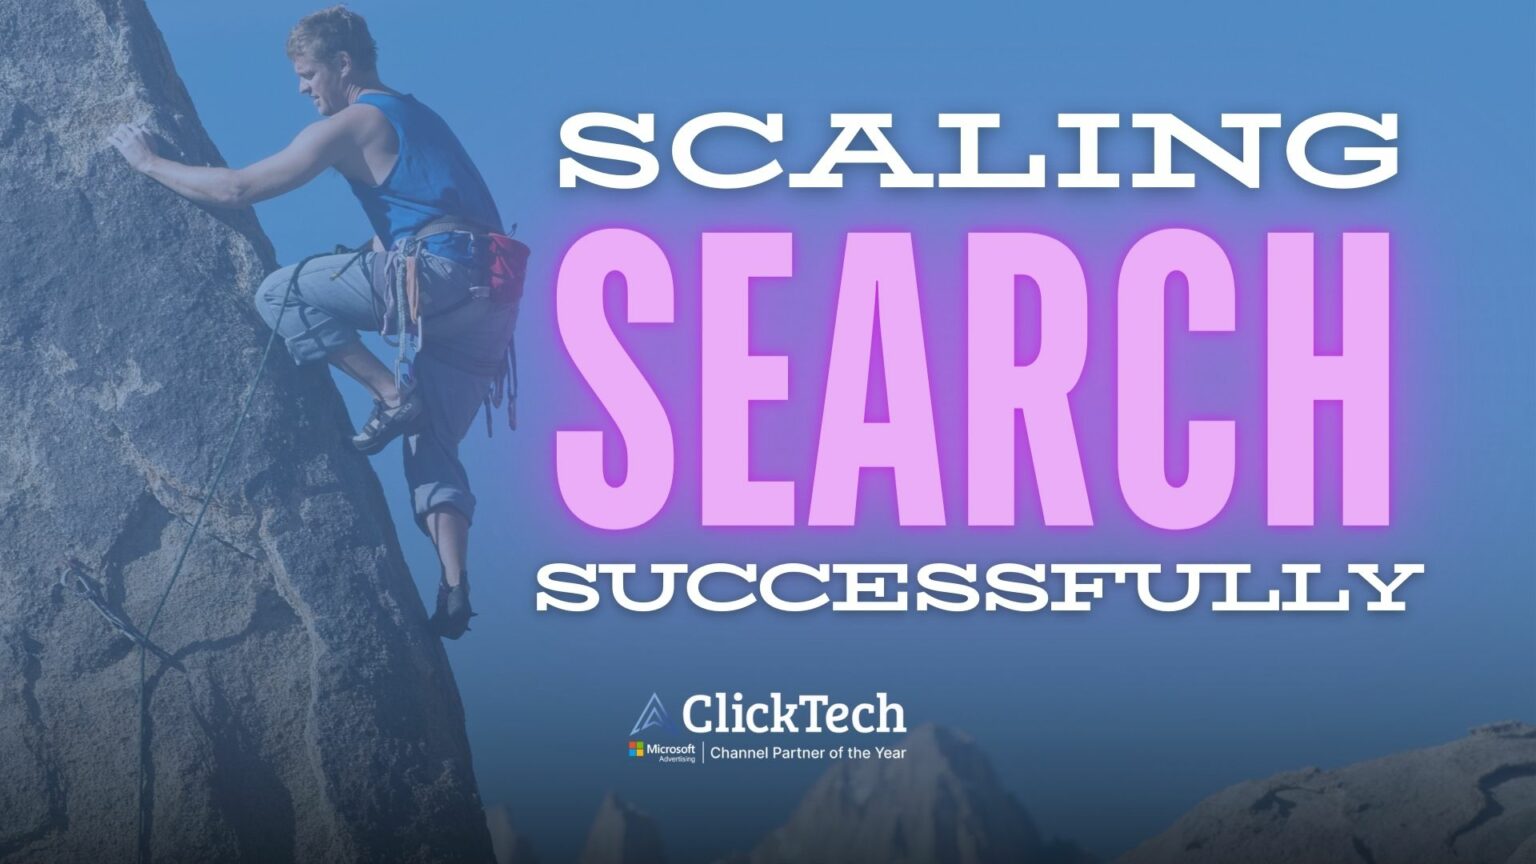 3 Strategic Keys to Scaling Search Successfully